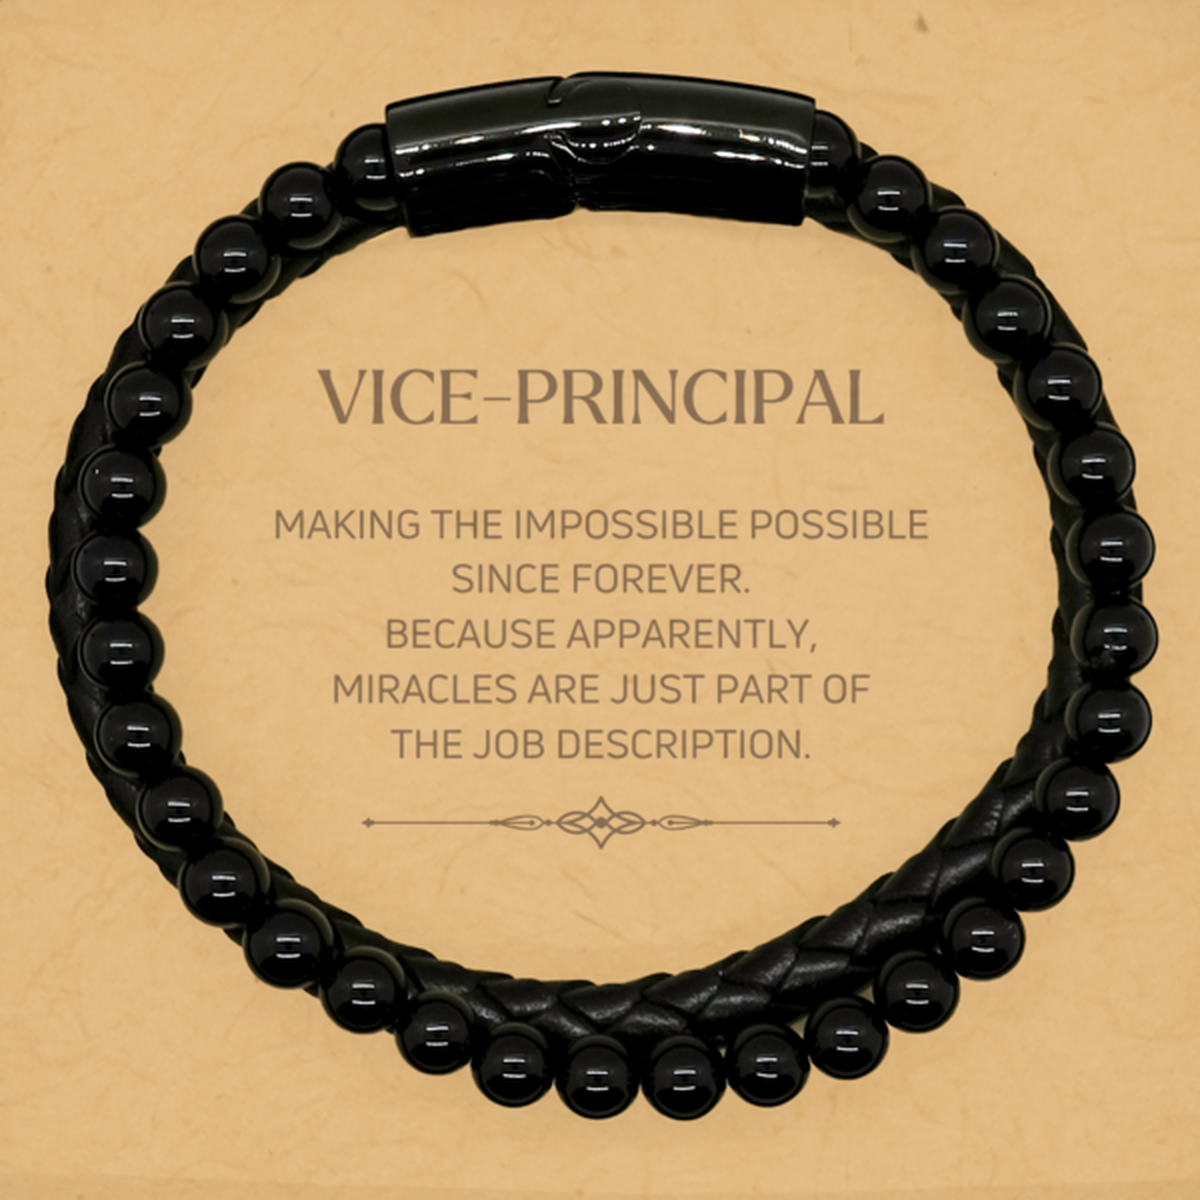 Funny Vice-principal Gifts, Miracles are just part of the job description, Inspirational Birthday Stone Leather Bracelets For Vice-principal, Men, Women, Coworkers, Friends, Boss